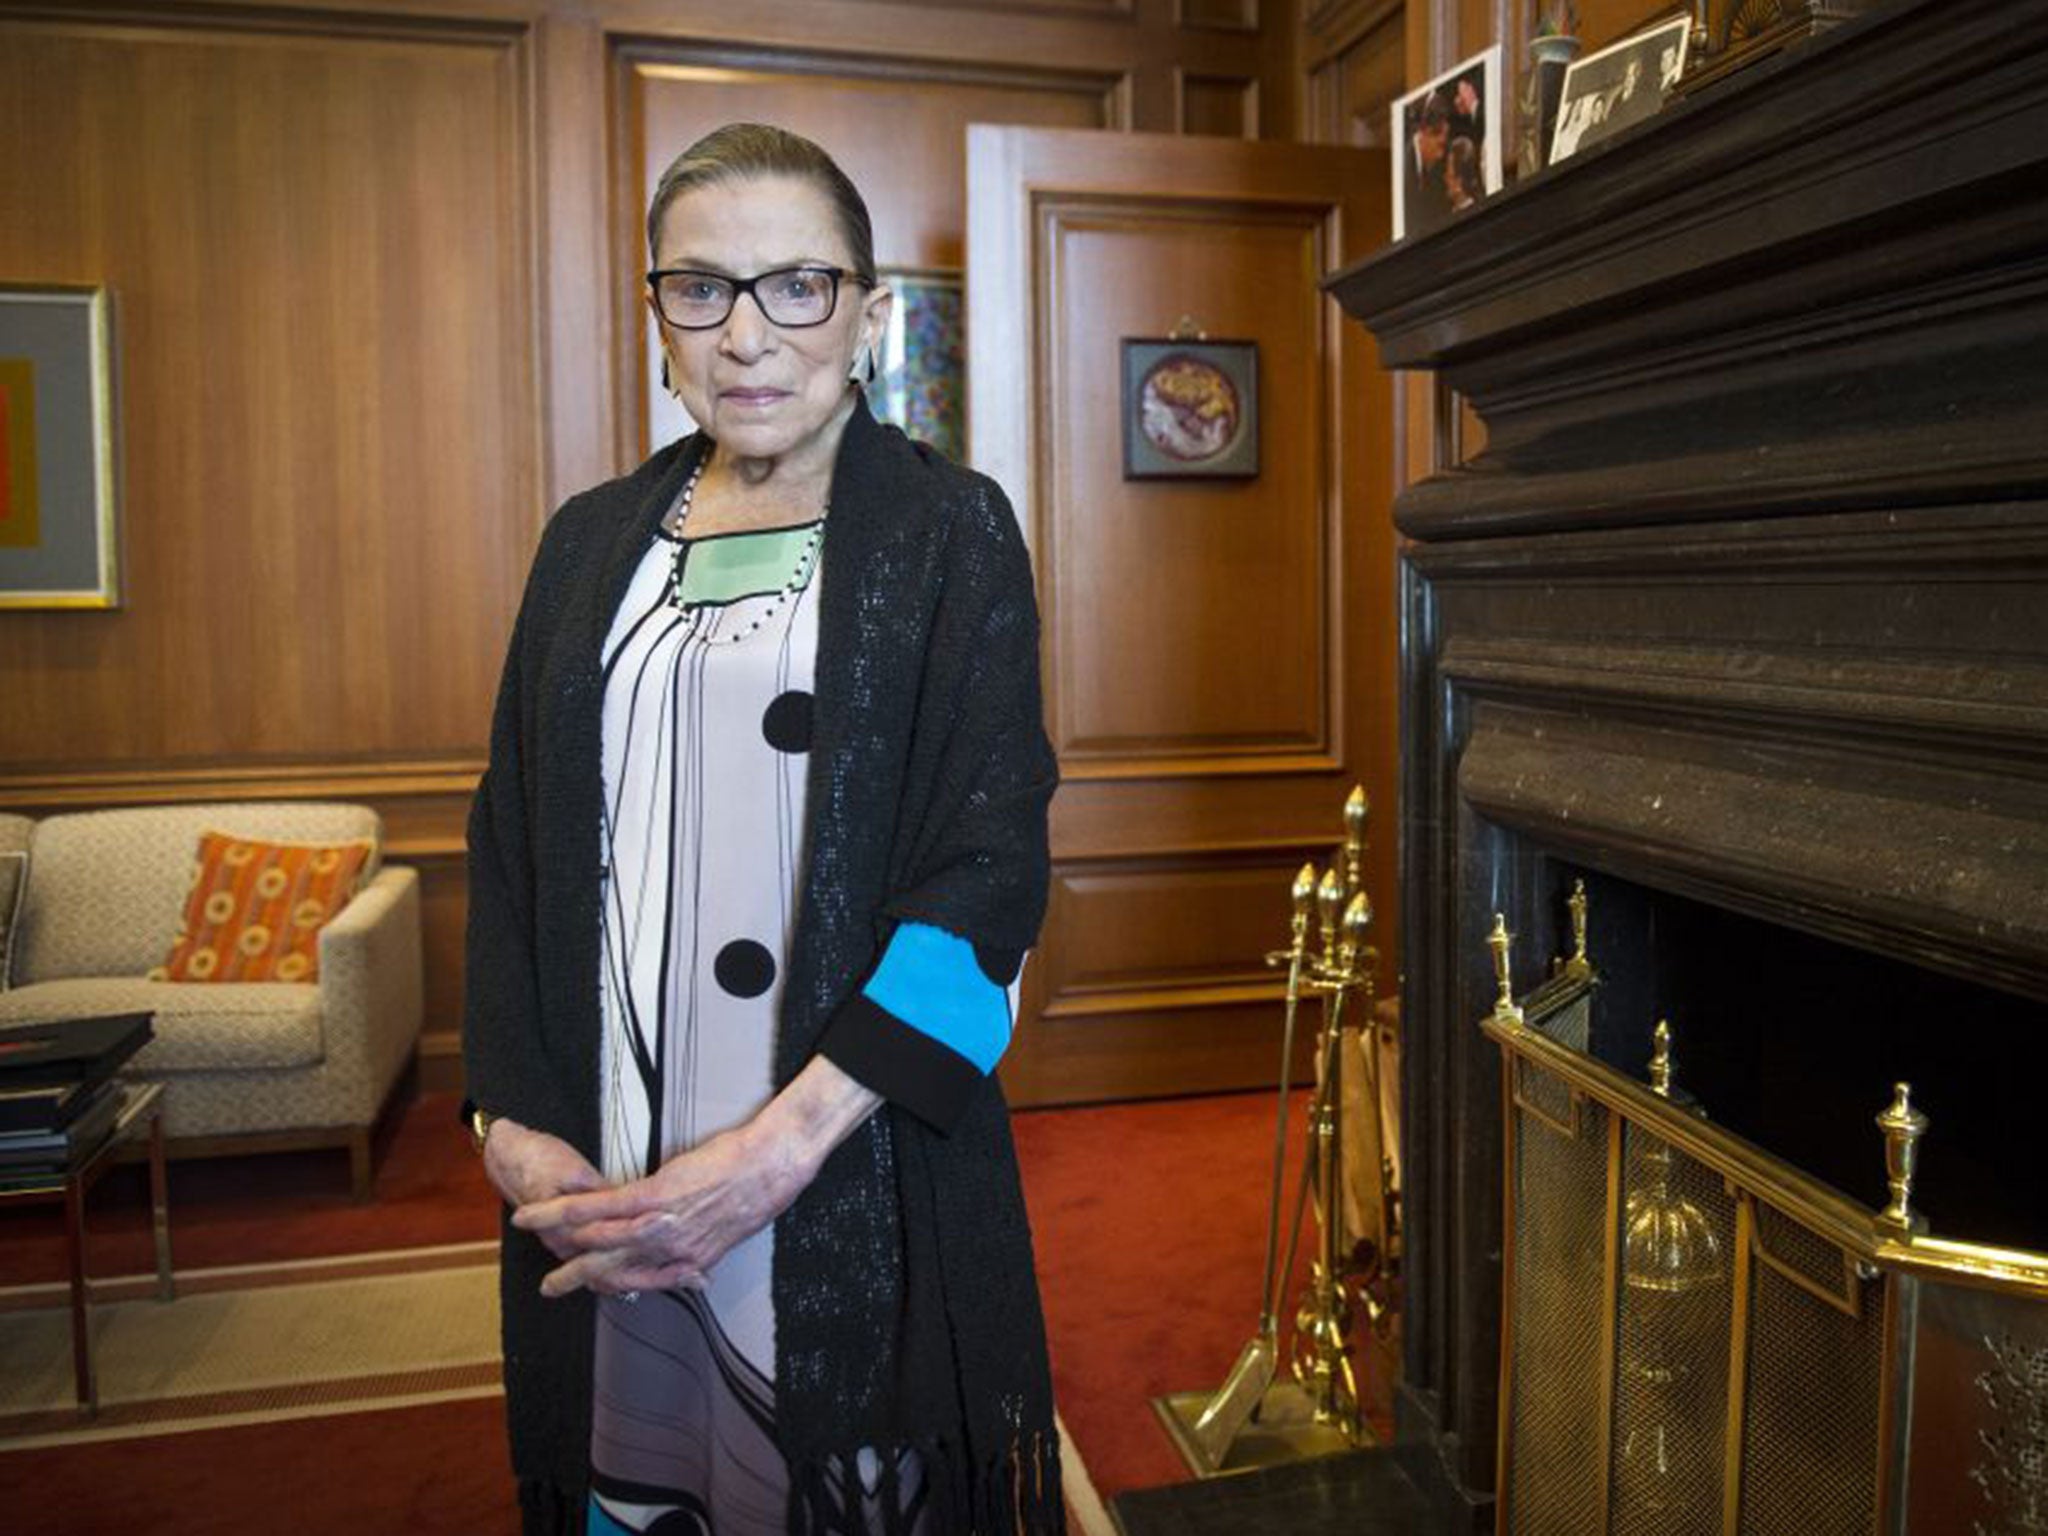 Justice Ginsburg has been on an interview spree